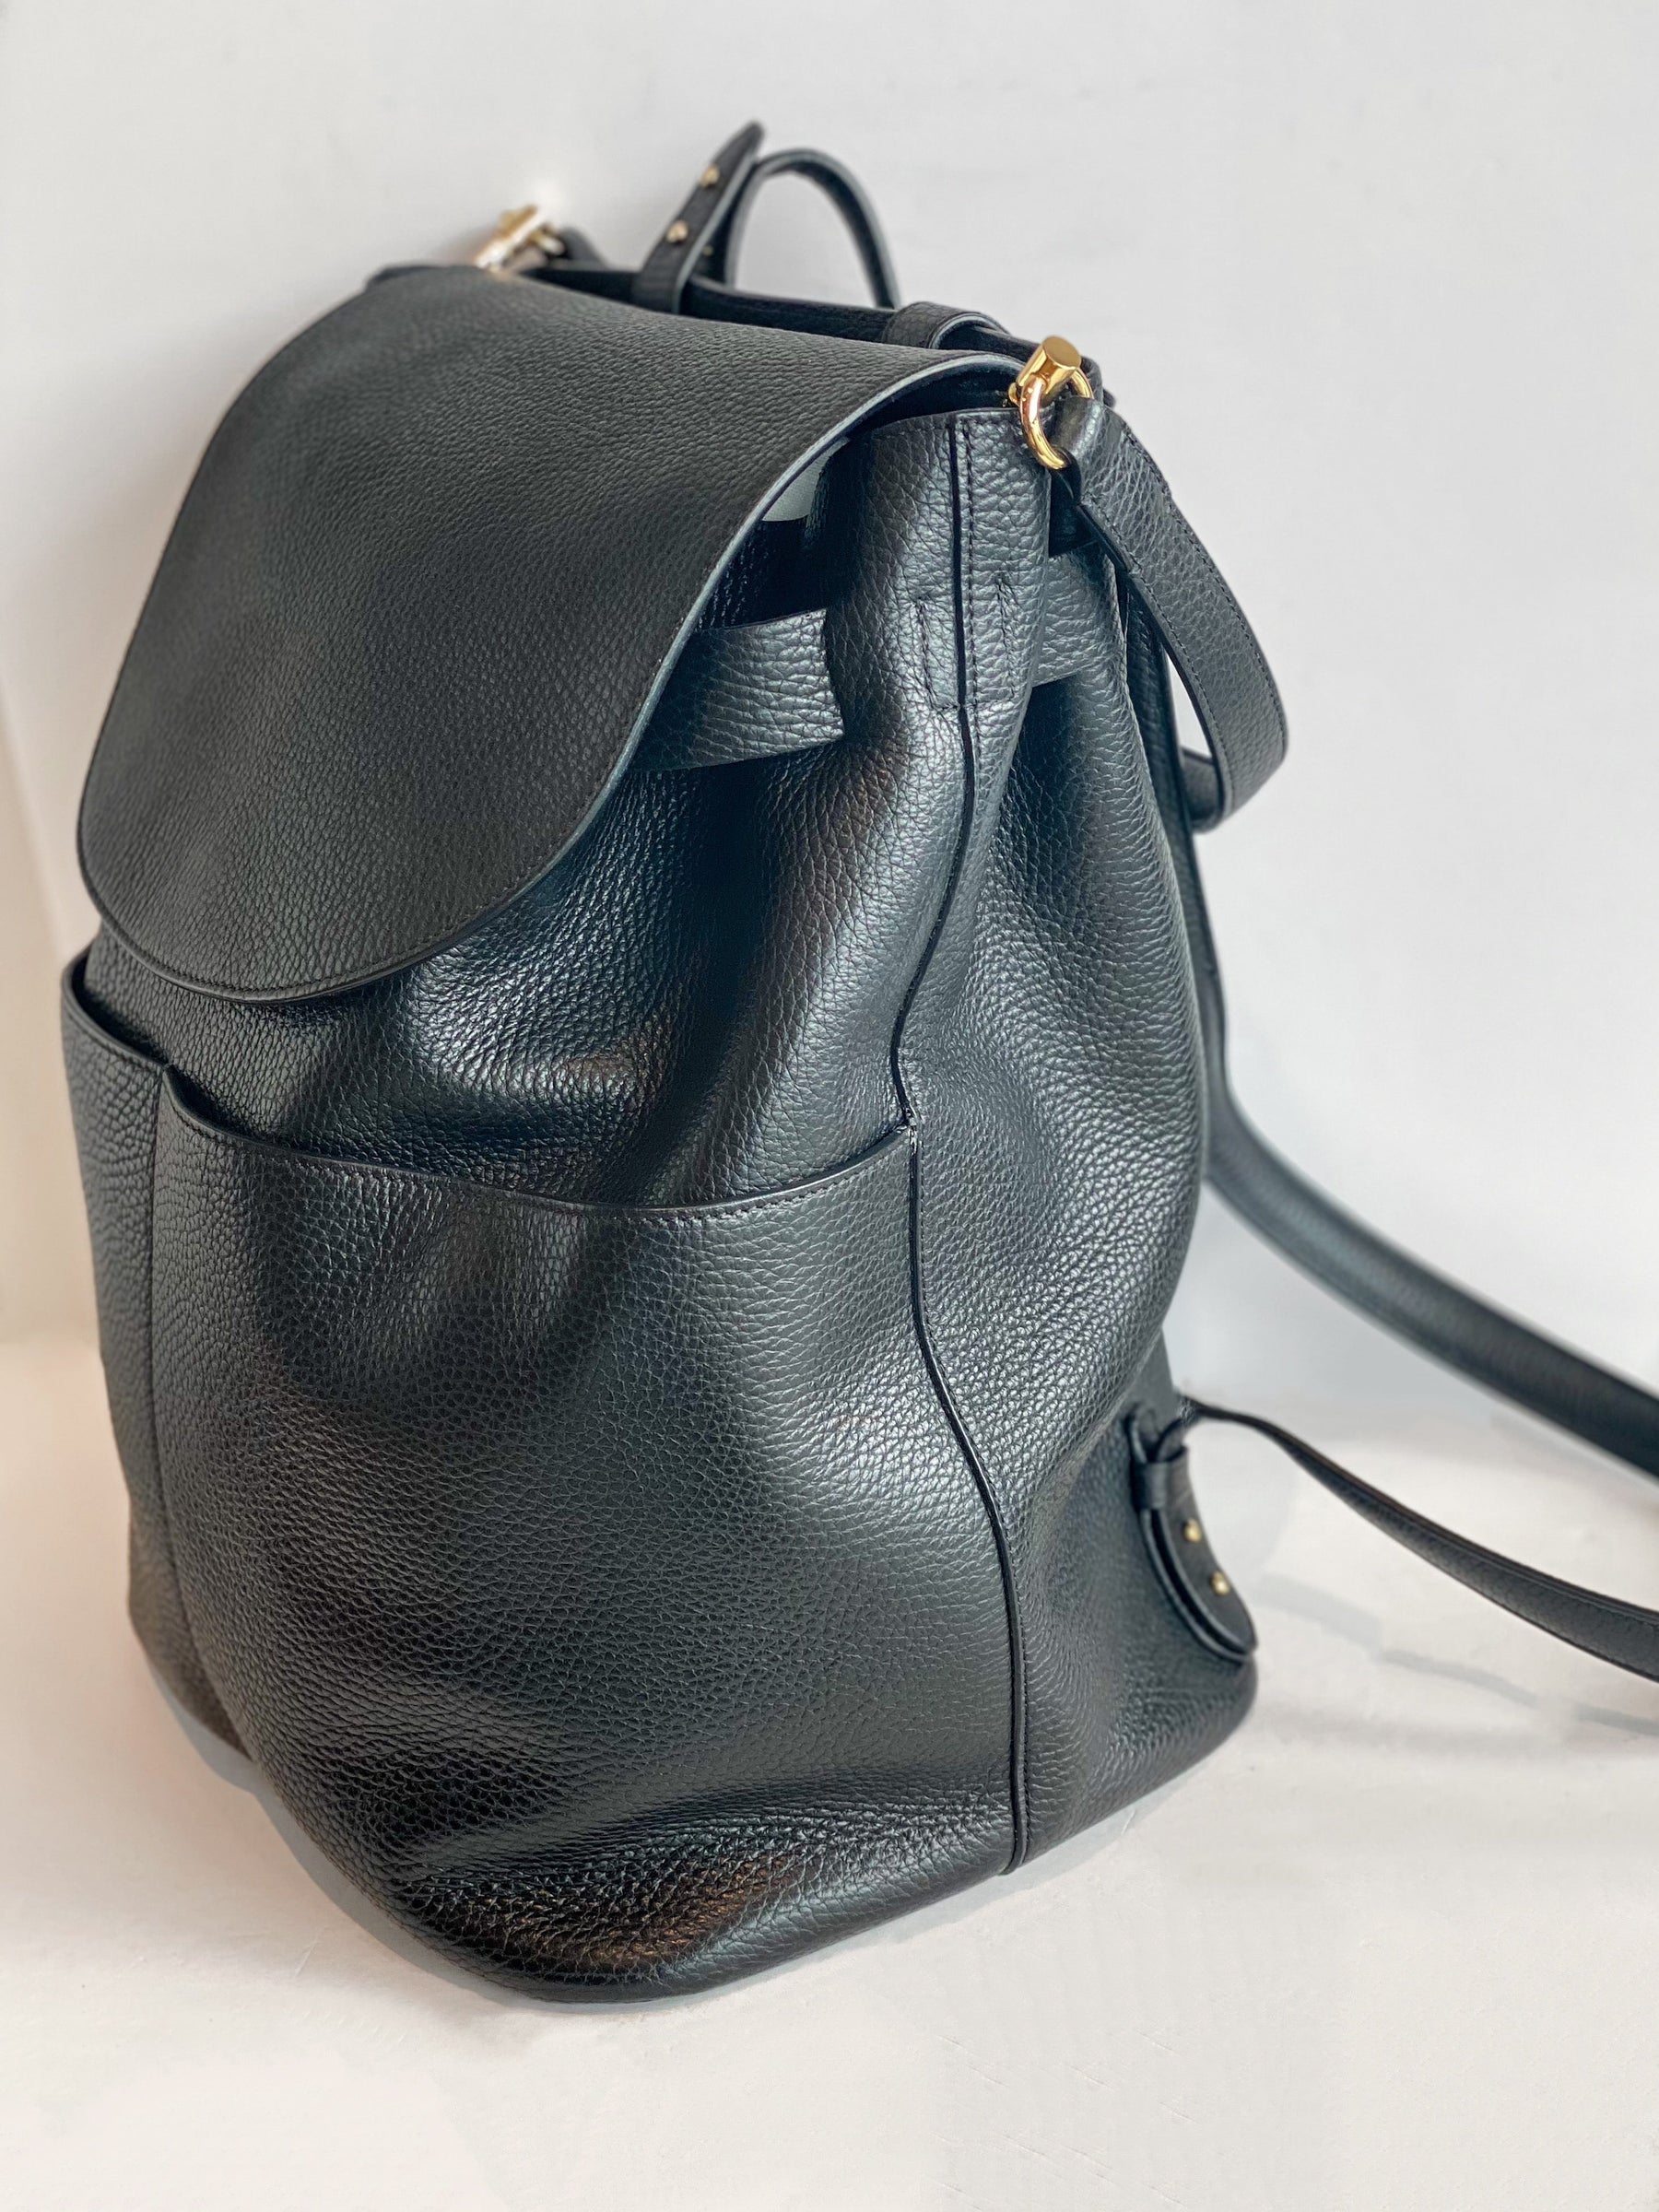 Cuyana Leather Backpack side